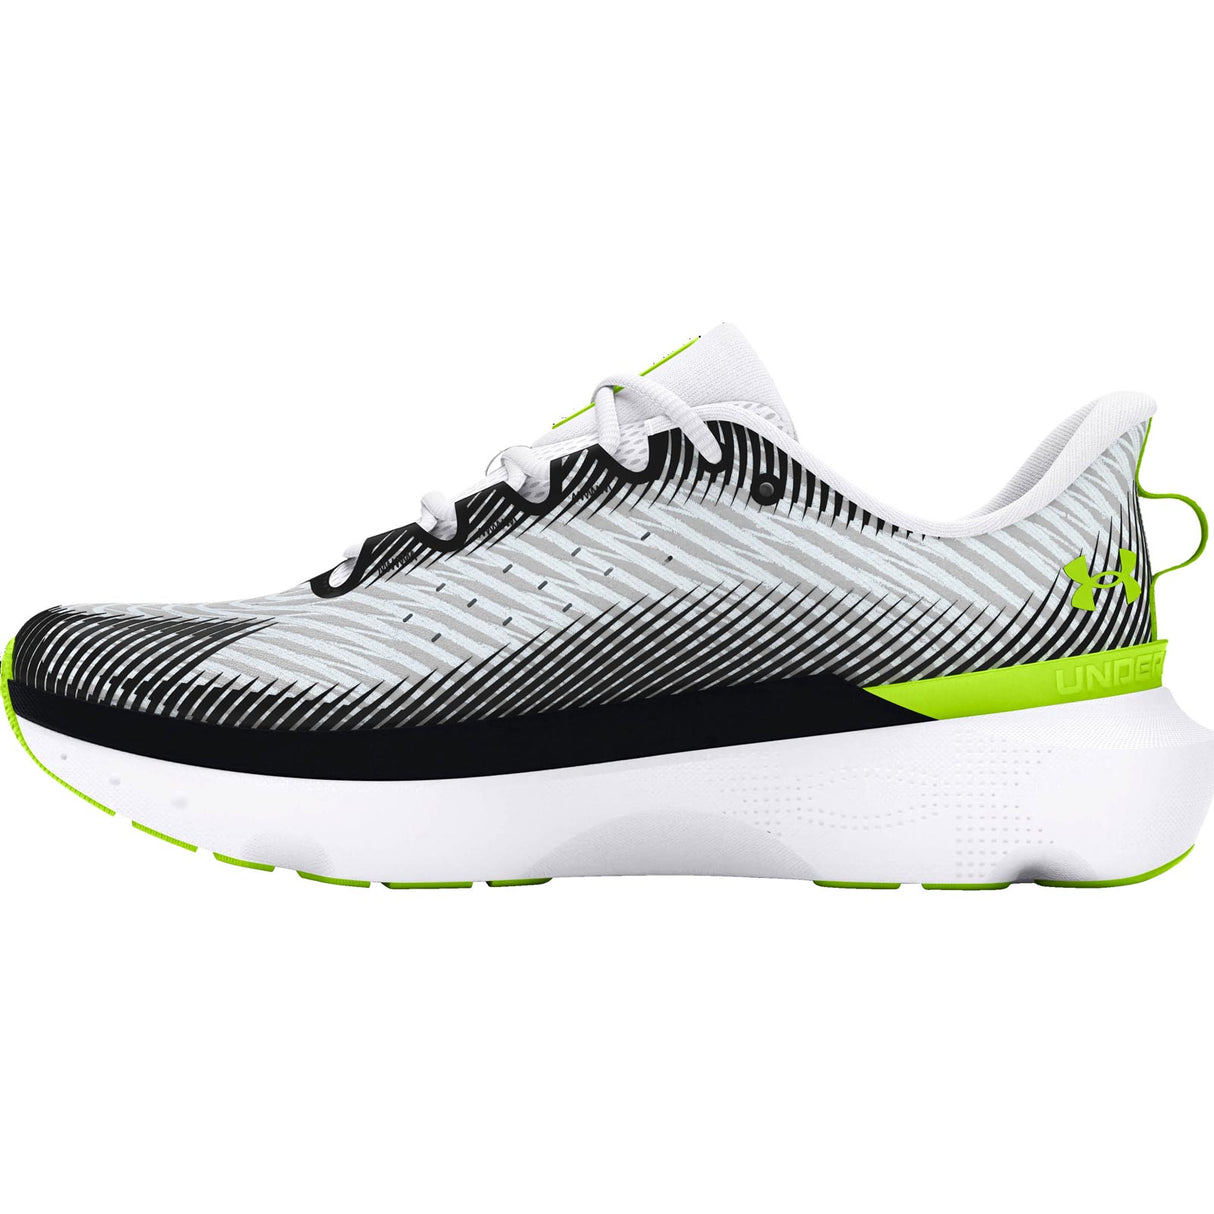 Under Armour Infinite Pro Mens Running Shoes